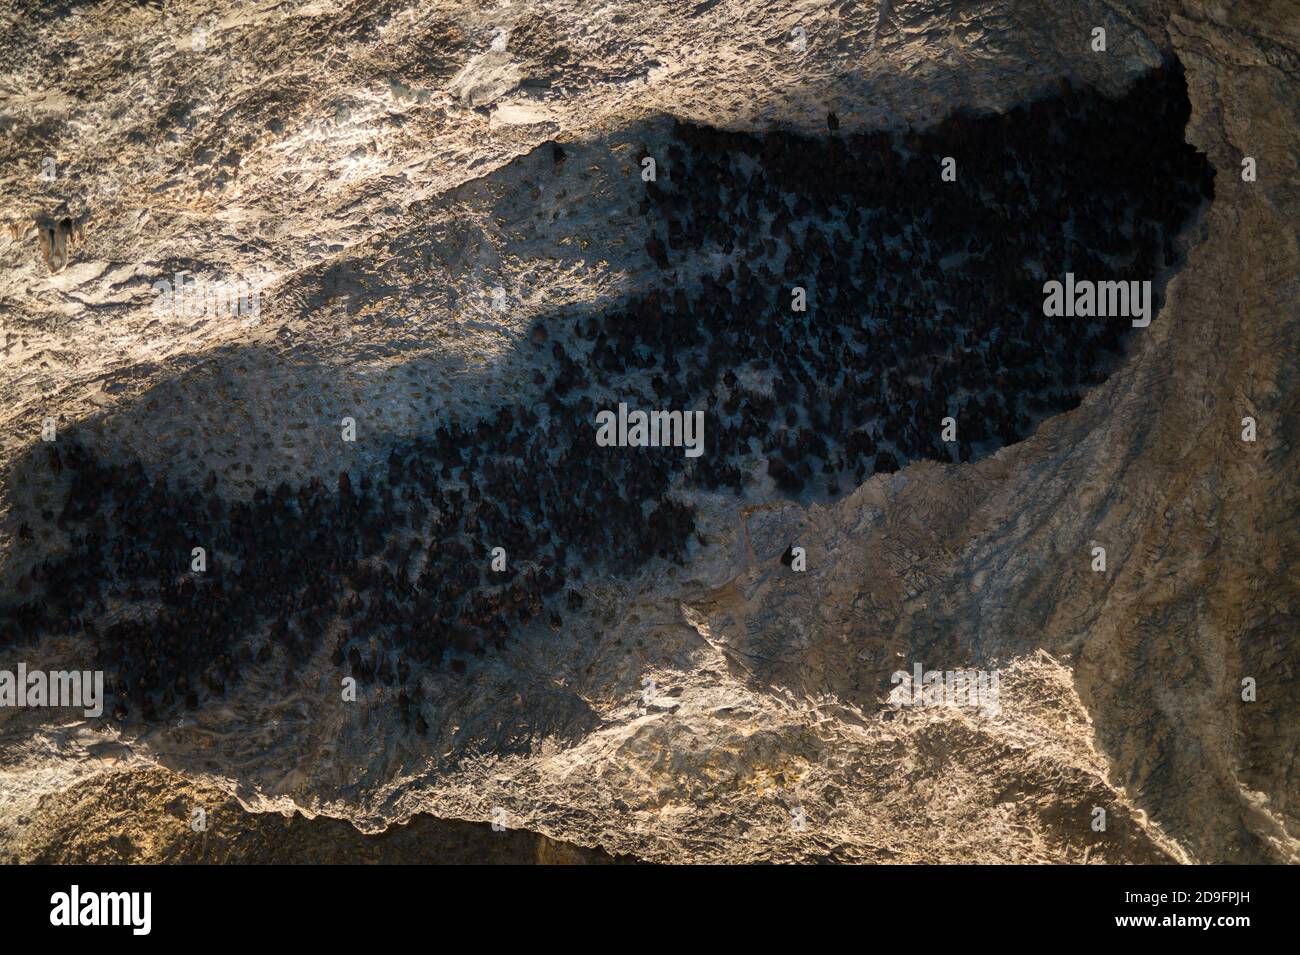 bats hanging from the ceiling of a cave Stock Photo